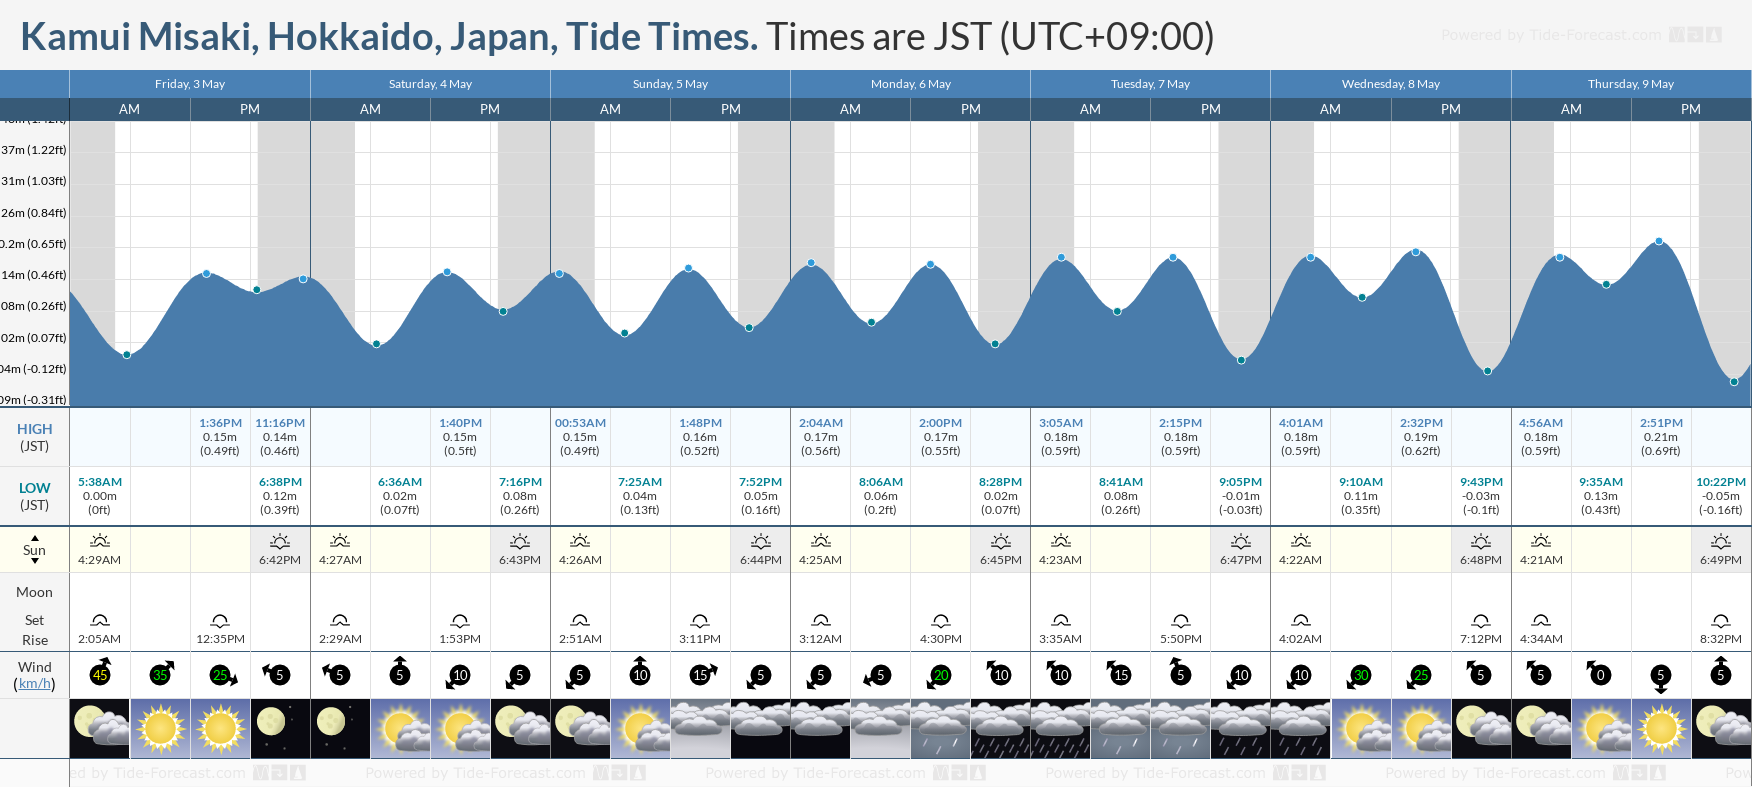 Kamui Misaki, Hokkaido, Japan Tide Chart including high and low tide tide times for the next 7 days